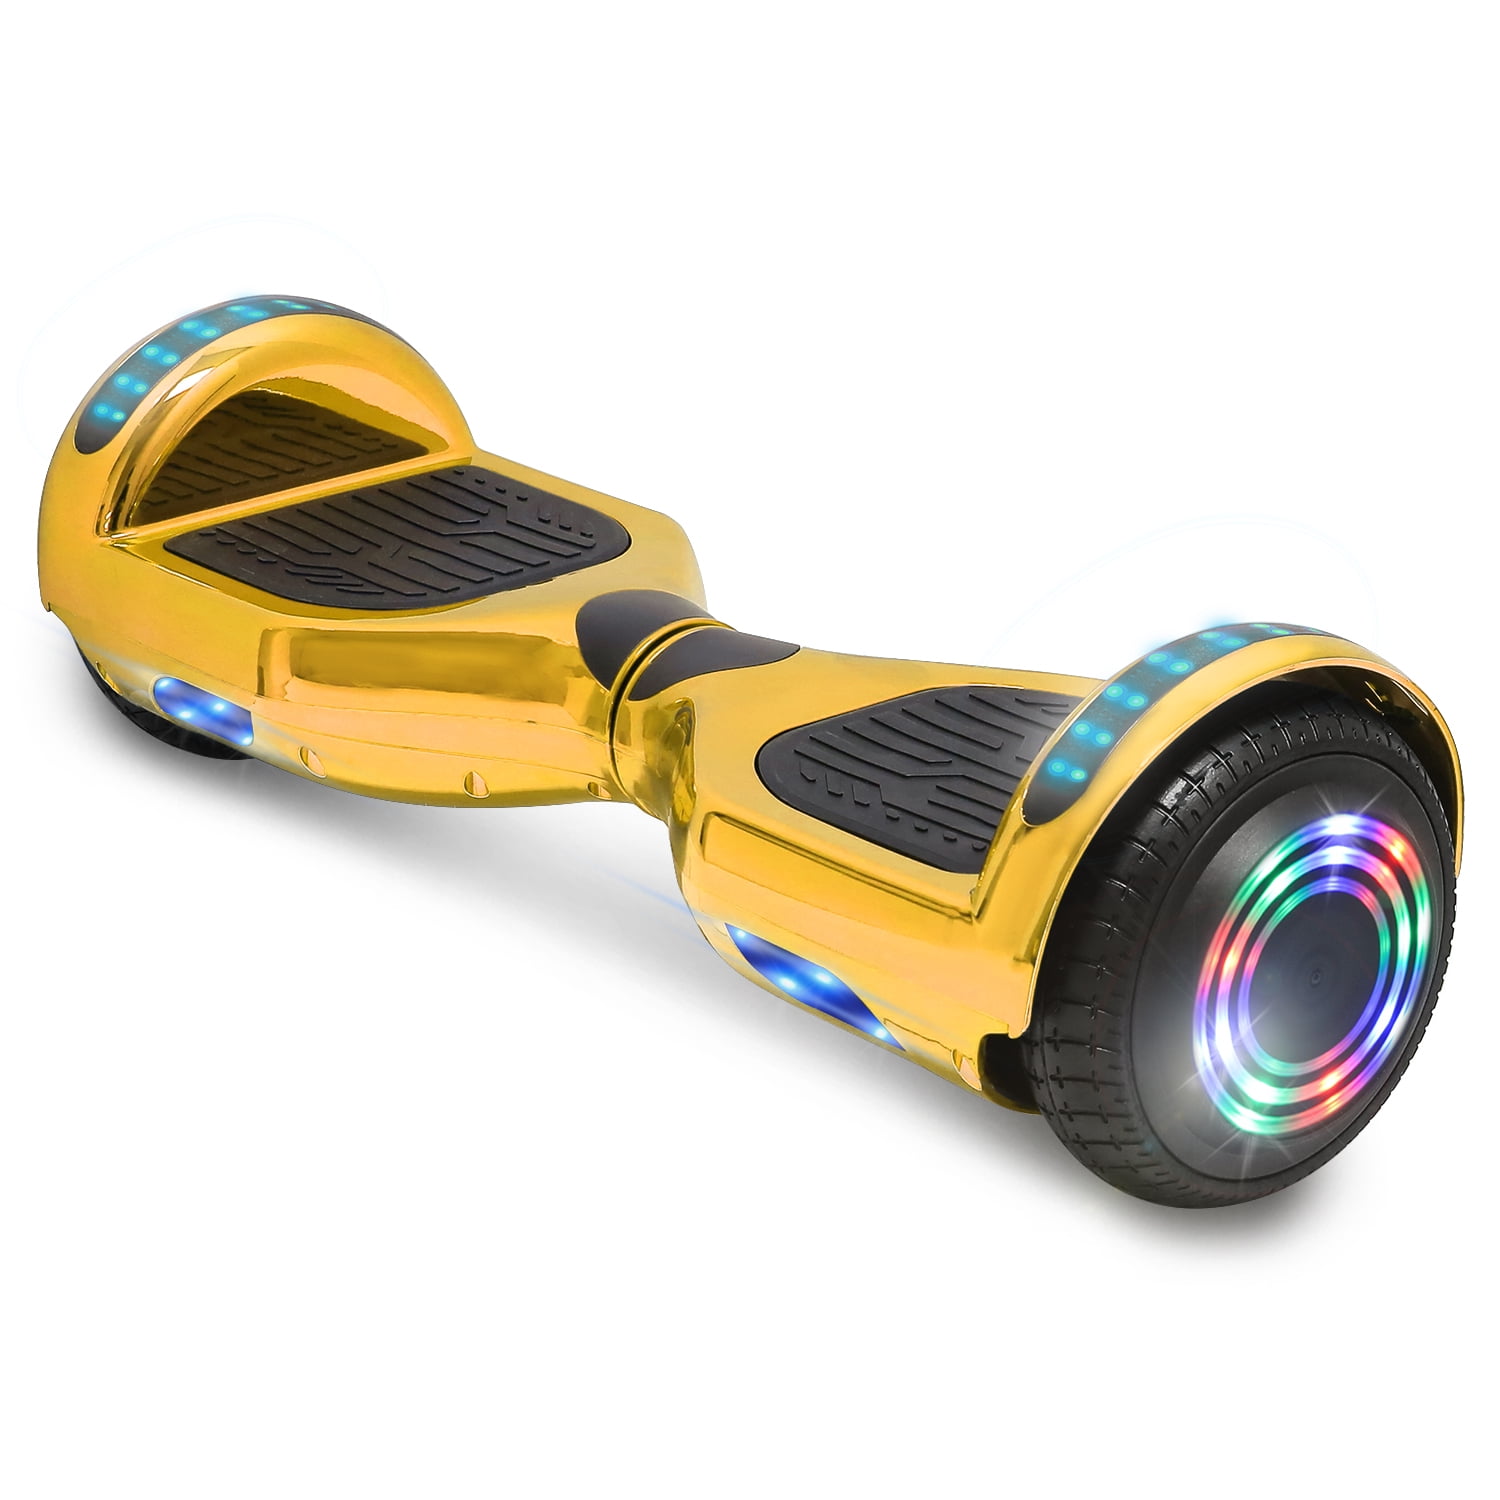 UL2272 Certified TPS 6.5 Hoverboard Electric Self Balancing Scooter with LED Wheels and Lights 